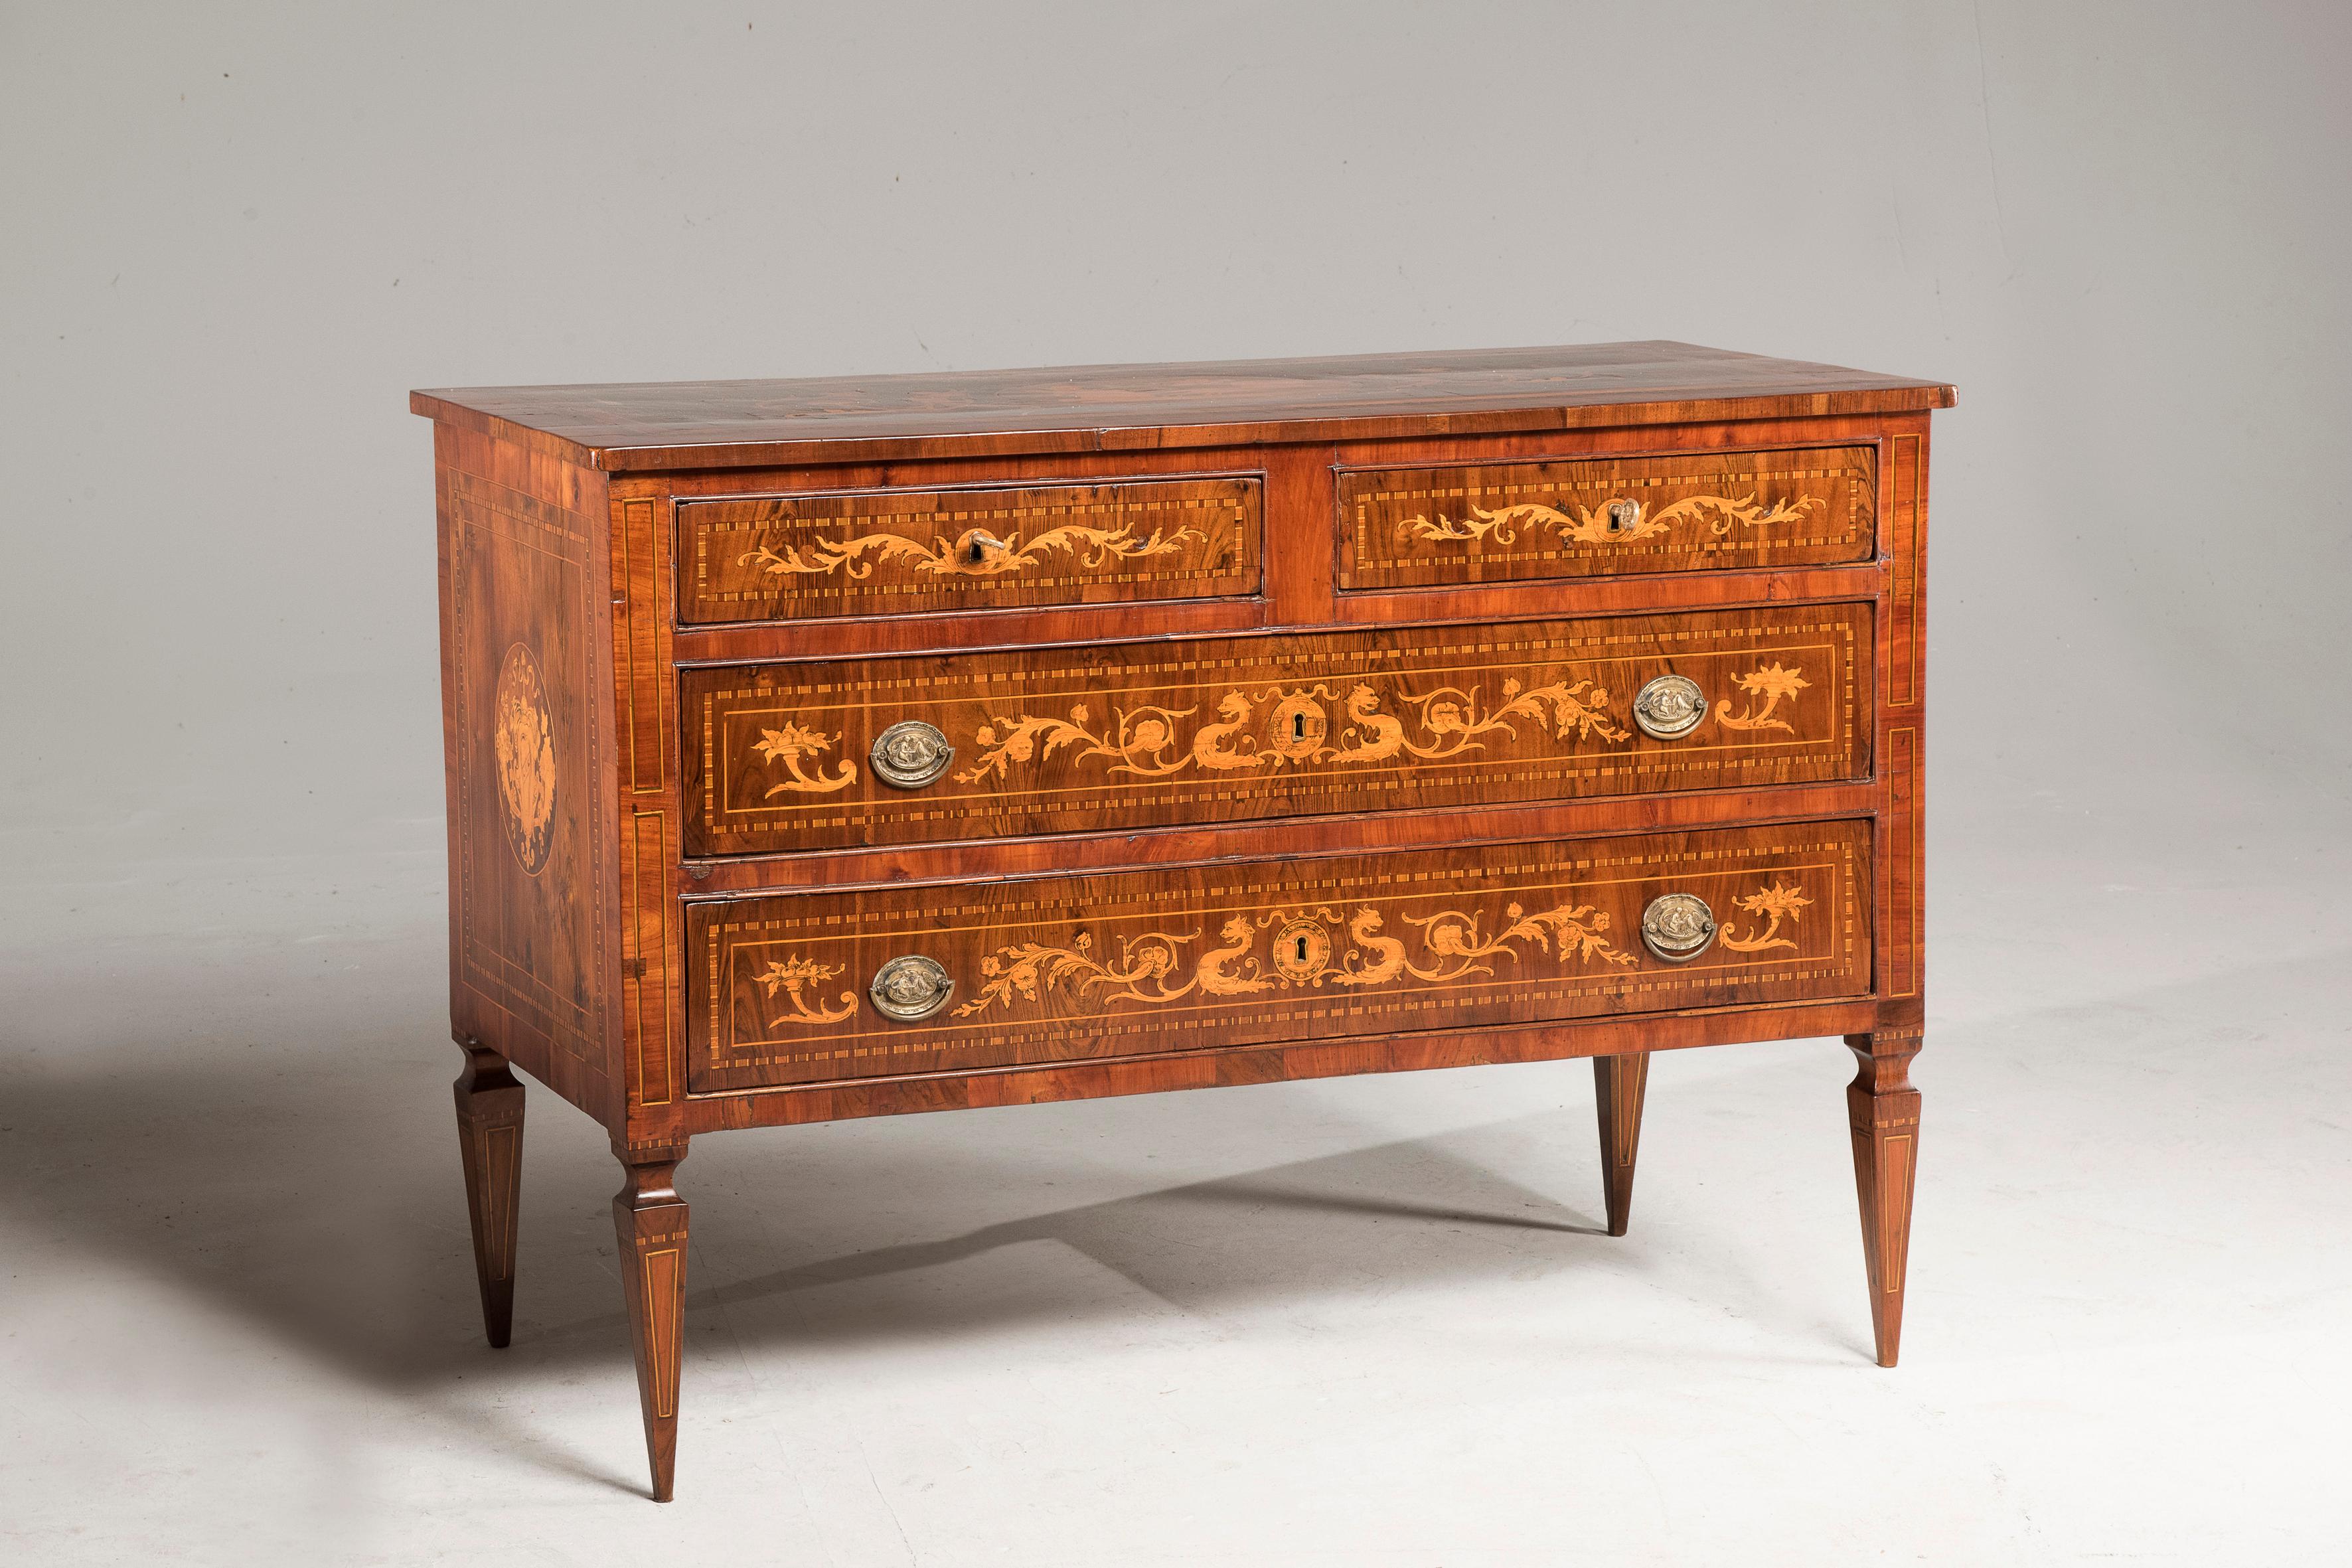 Italian (from Lombardia Region) Louis xvi period chest of drawers.

Inlaid with different wood essences. Original back and inner parts besides handles and lockers. Conservative restoration of wooden parts.

Size: TBC.